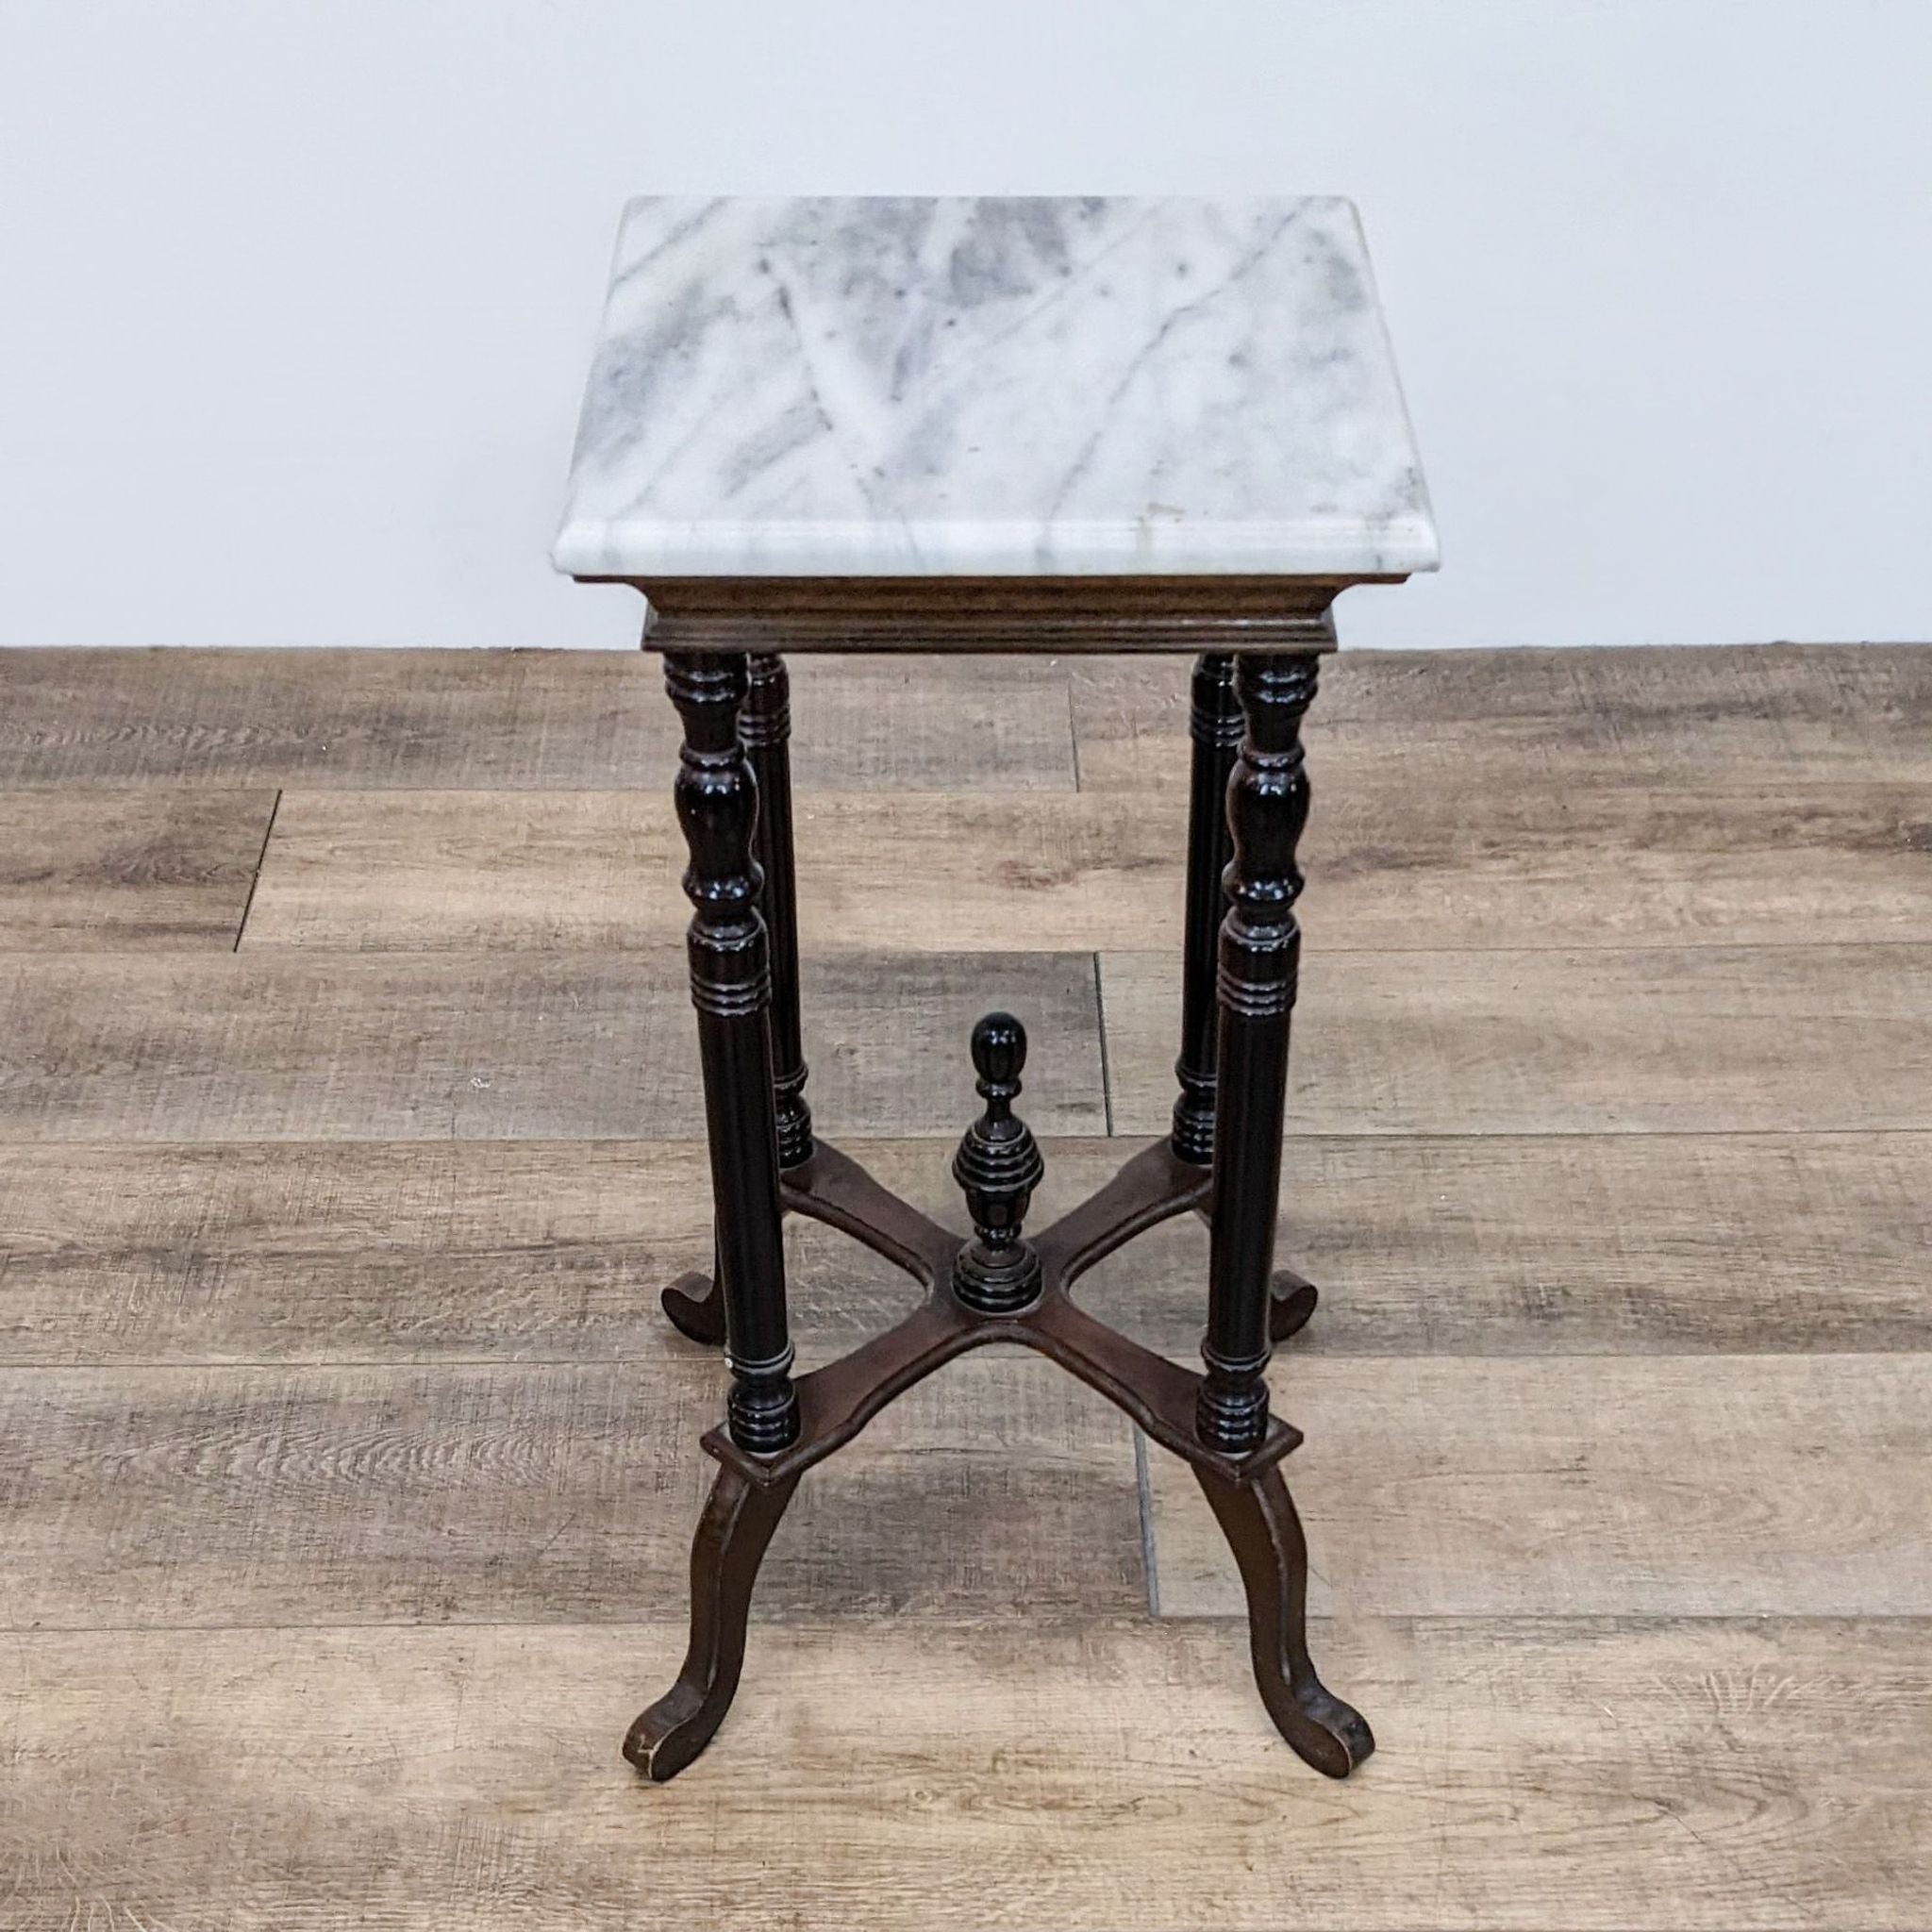 Reperch branded side table featuring a marble top and ornate turned wood legs on a wooden floor.